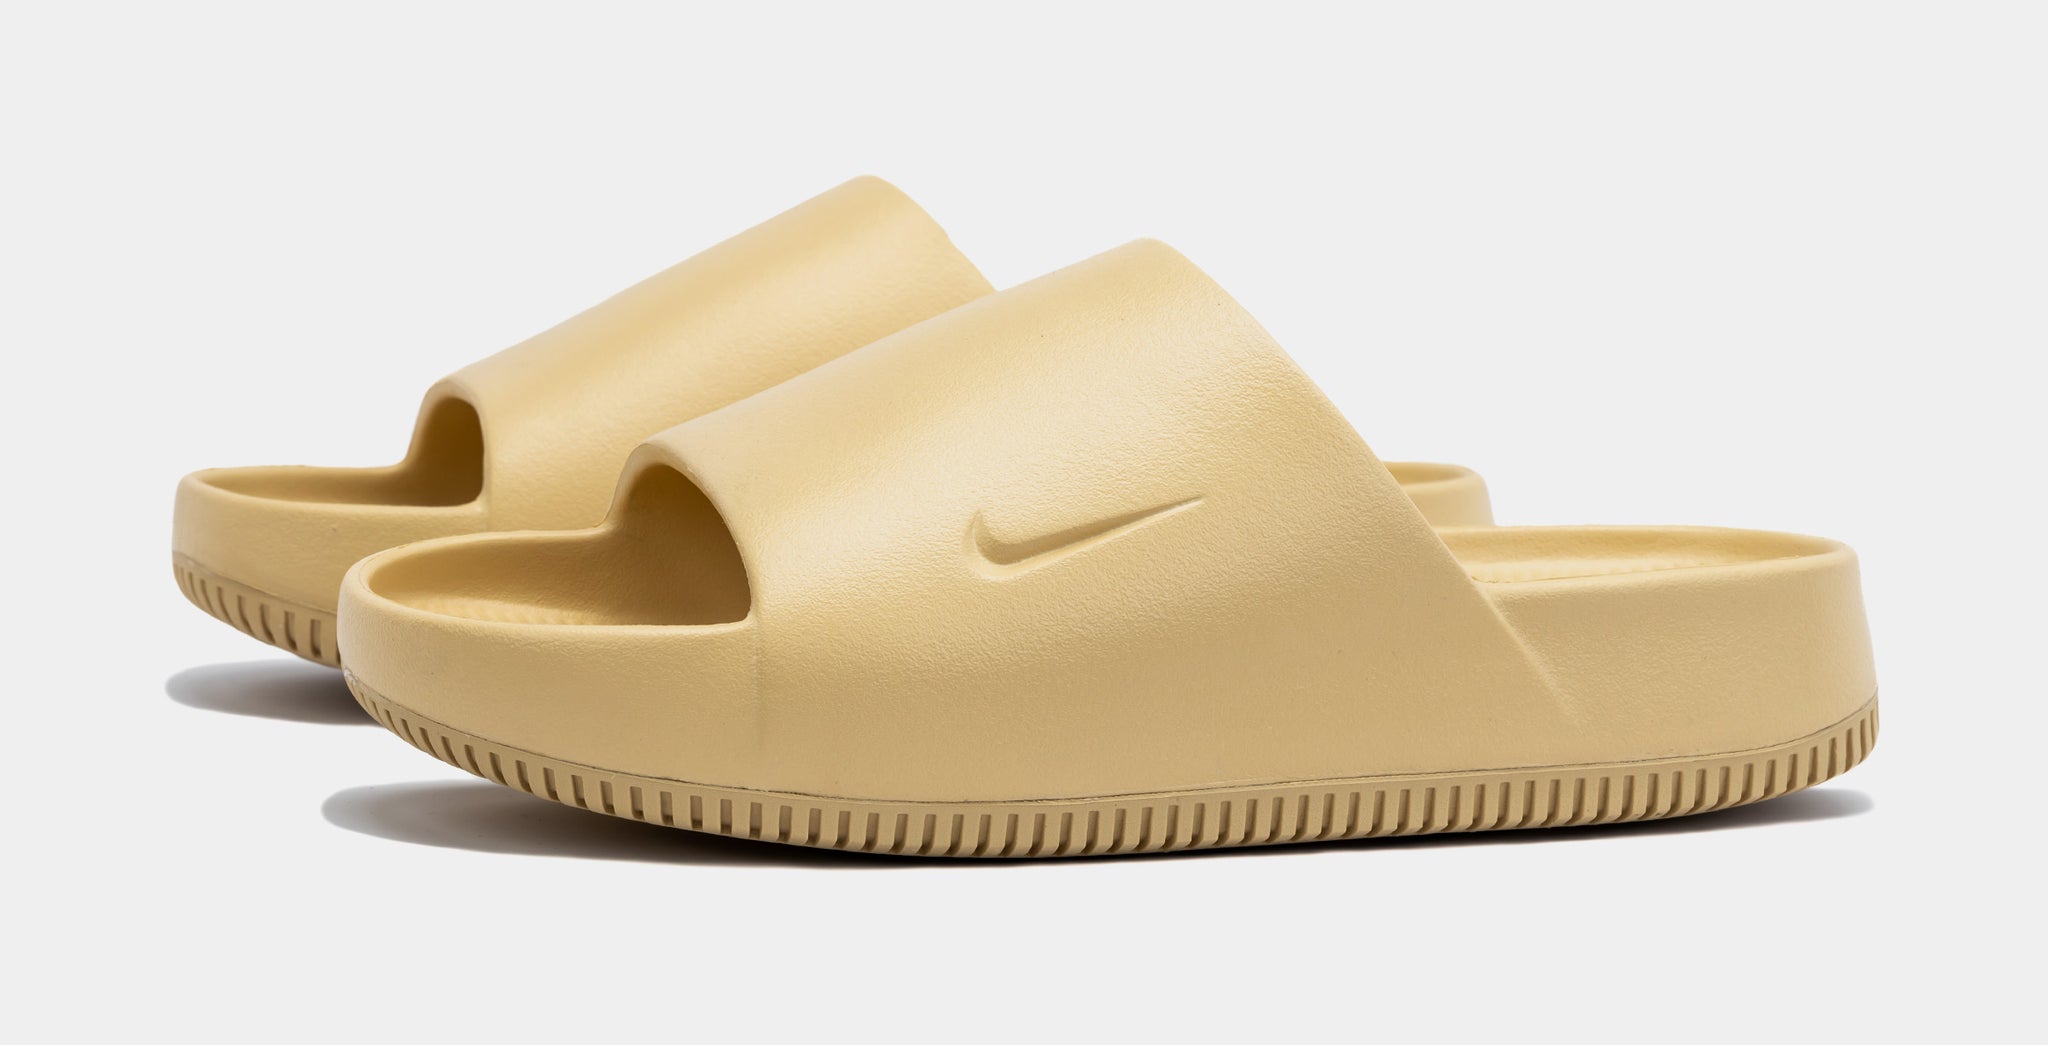 How Does the Nike Calm Slide Compare to the adidas Yeezy Slide